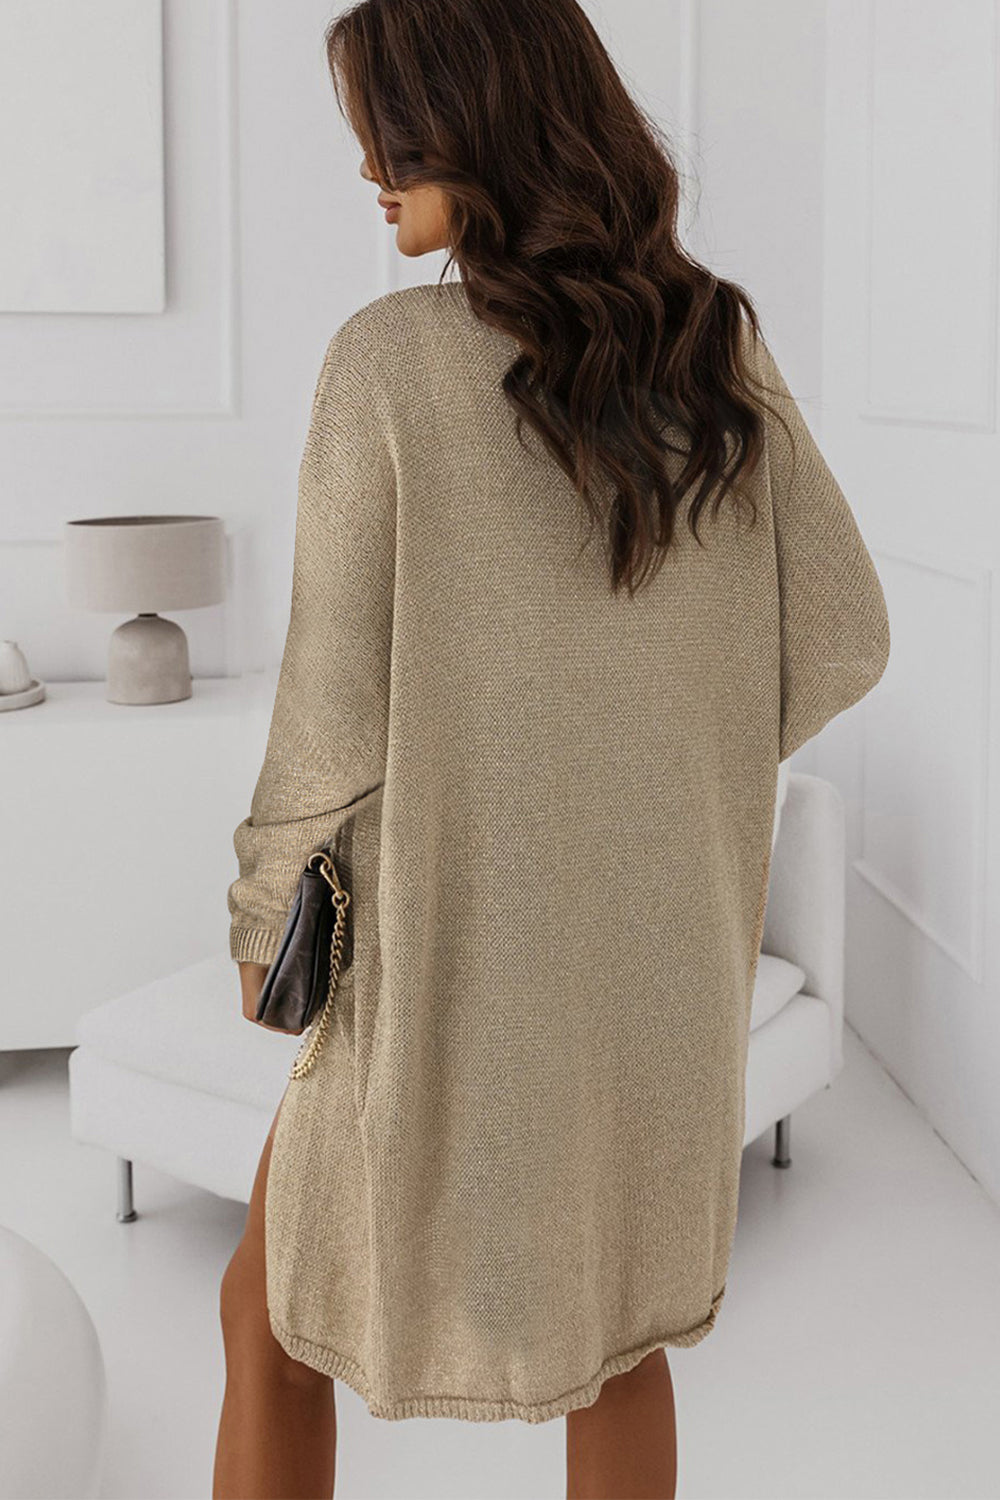 Long Sleeve Pocketed Cardigan - Women’s Clothing & Accessories - Shirts & Tops - 2 - 2024